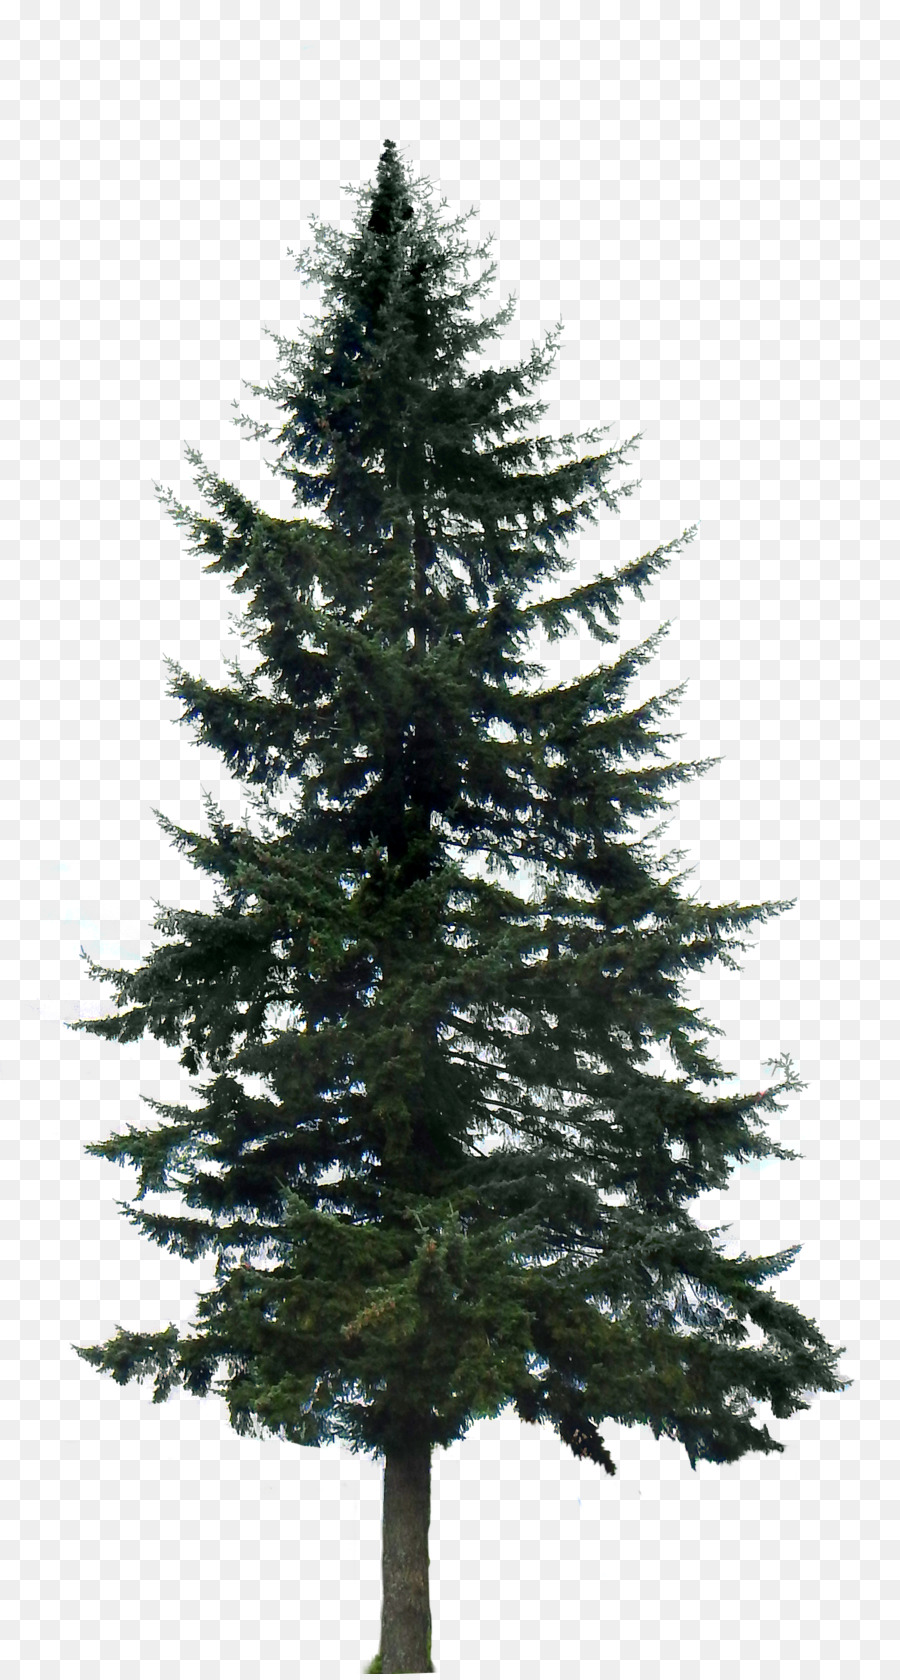 Western yellow pine Tree Clip art - fir-tree png download - 1653*3075 - Free Transparent Pine png Download.